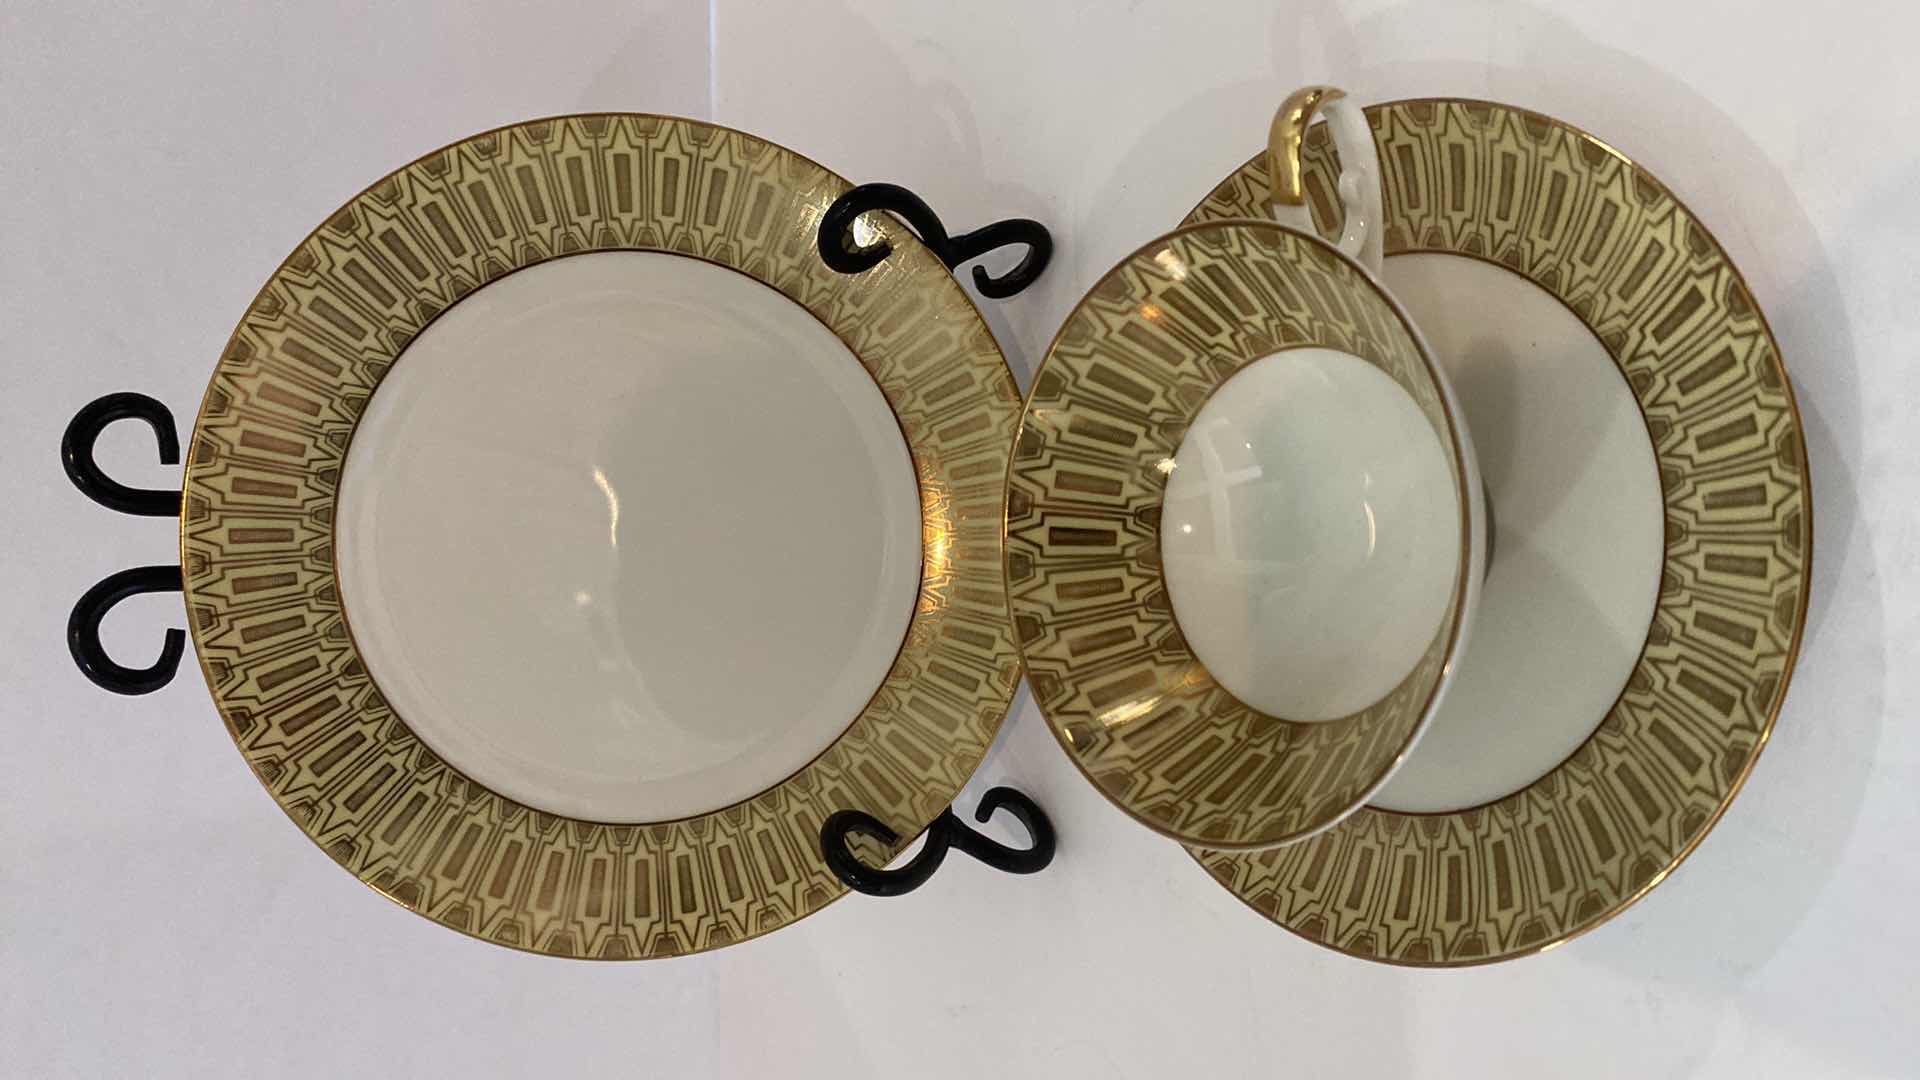 Photo 1 of RARE 1925 ALBOTH & KAISER BAVARIA 3 PIECE TEA CUP, SAUCER AND PLATE SET WITH GOLD EDGE